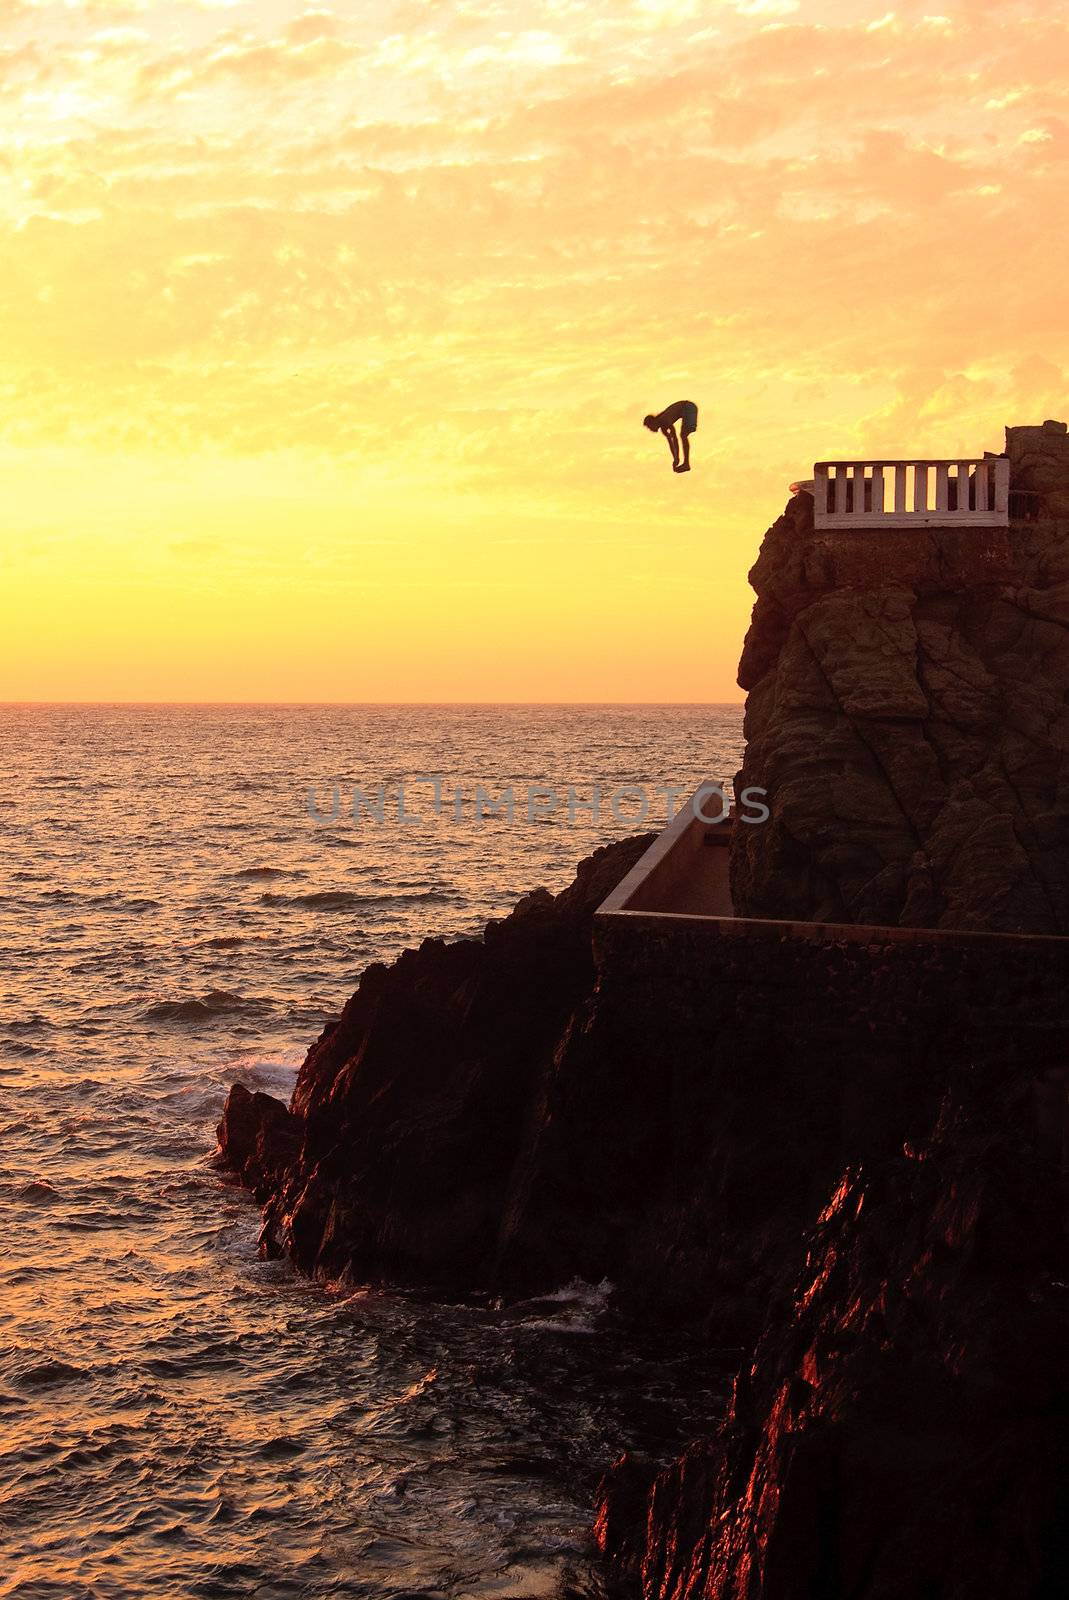 Cliff diver off the coast of Mazatlan at sunset by steheap